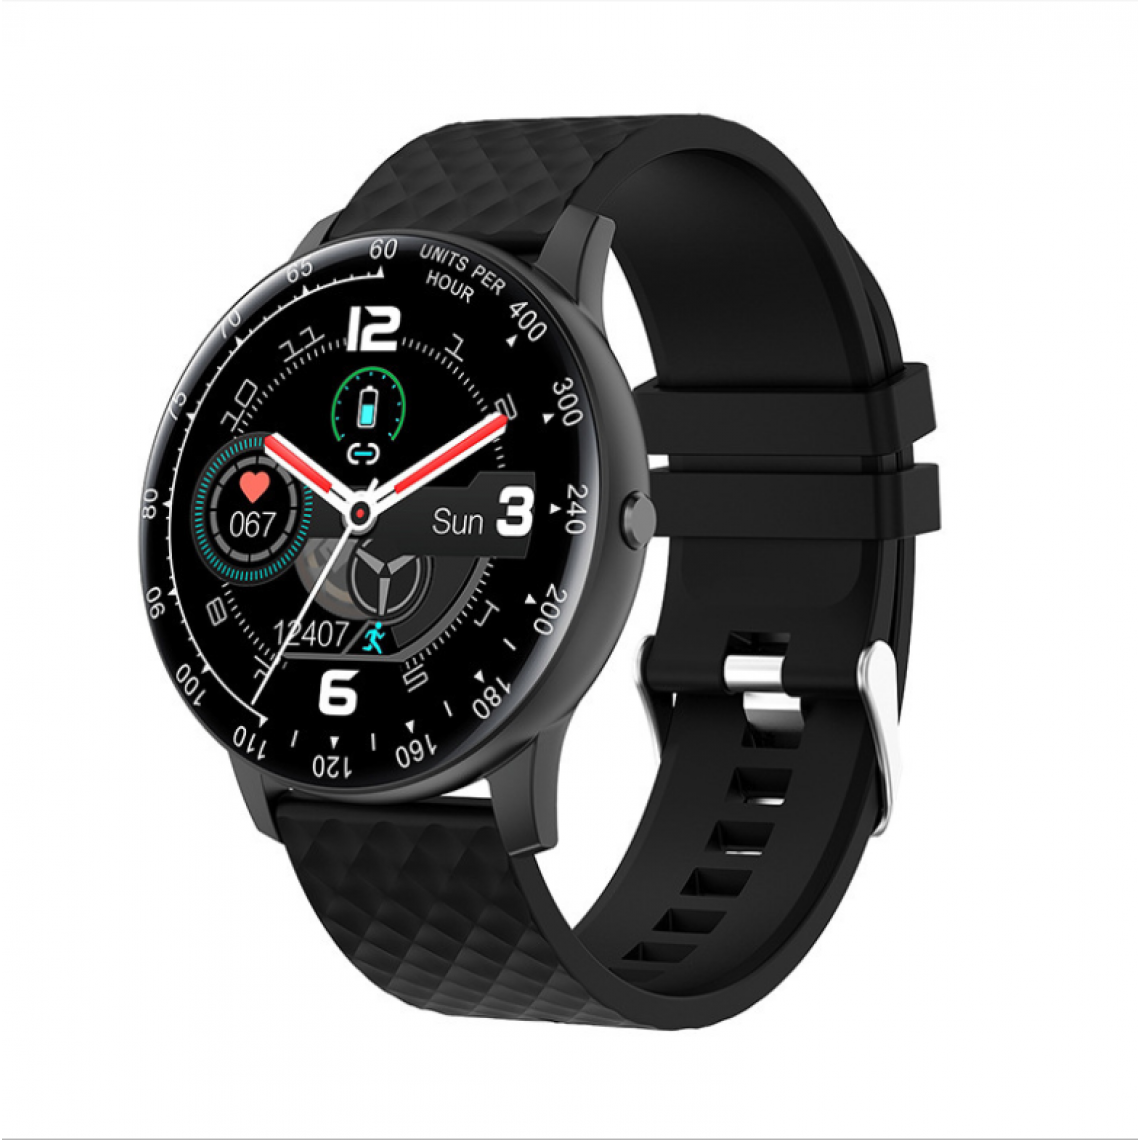 Chronotech Montres - Smart watch, fitness tracker, sleep detection with heart rate and blood pressure, suitable for work, sportsï¼blackï¼ - Montre connectée